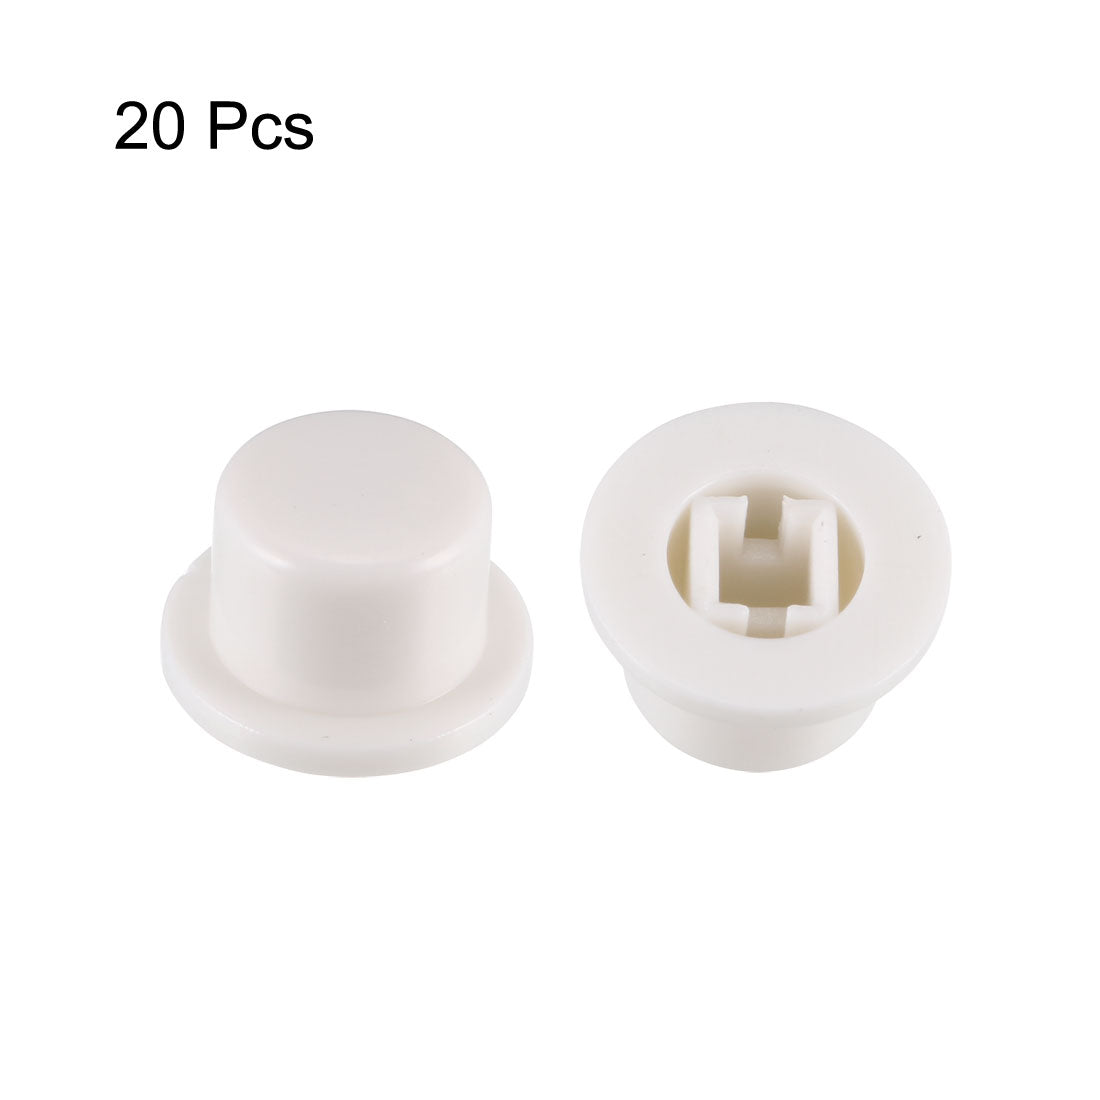 uxcell Uxcell 20Pcs Plastic 9.3x5.6mm Pushbutton Tactile Switch Caps Cover Keycaps White for 6x6x7.3mm Tact Switch